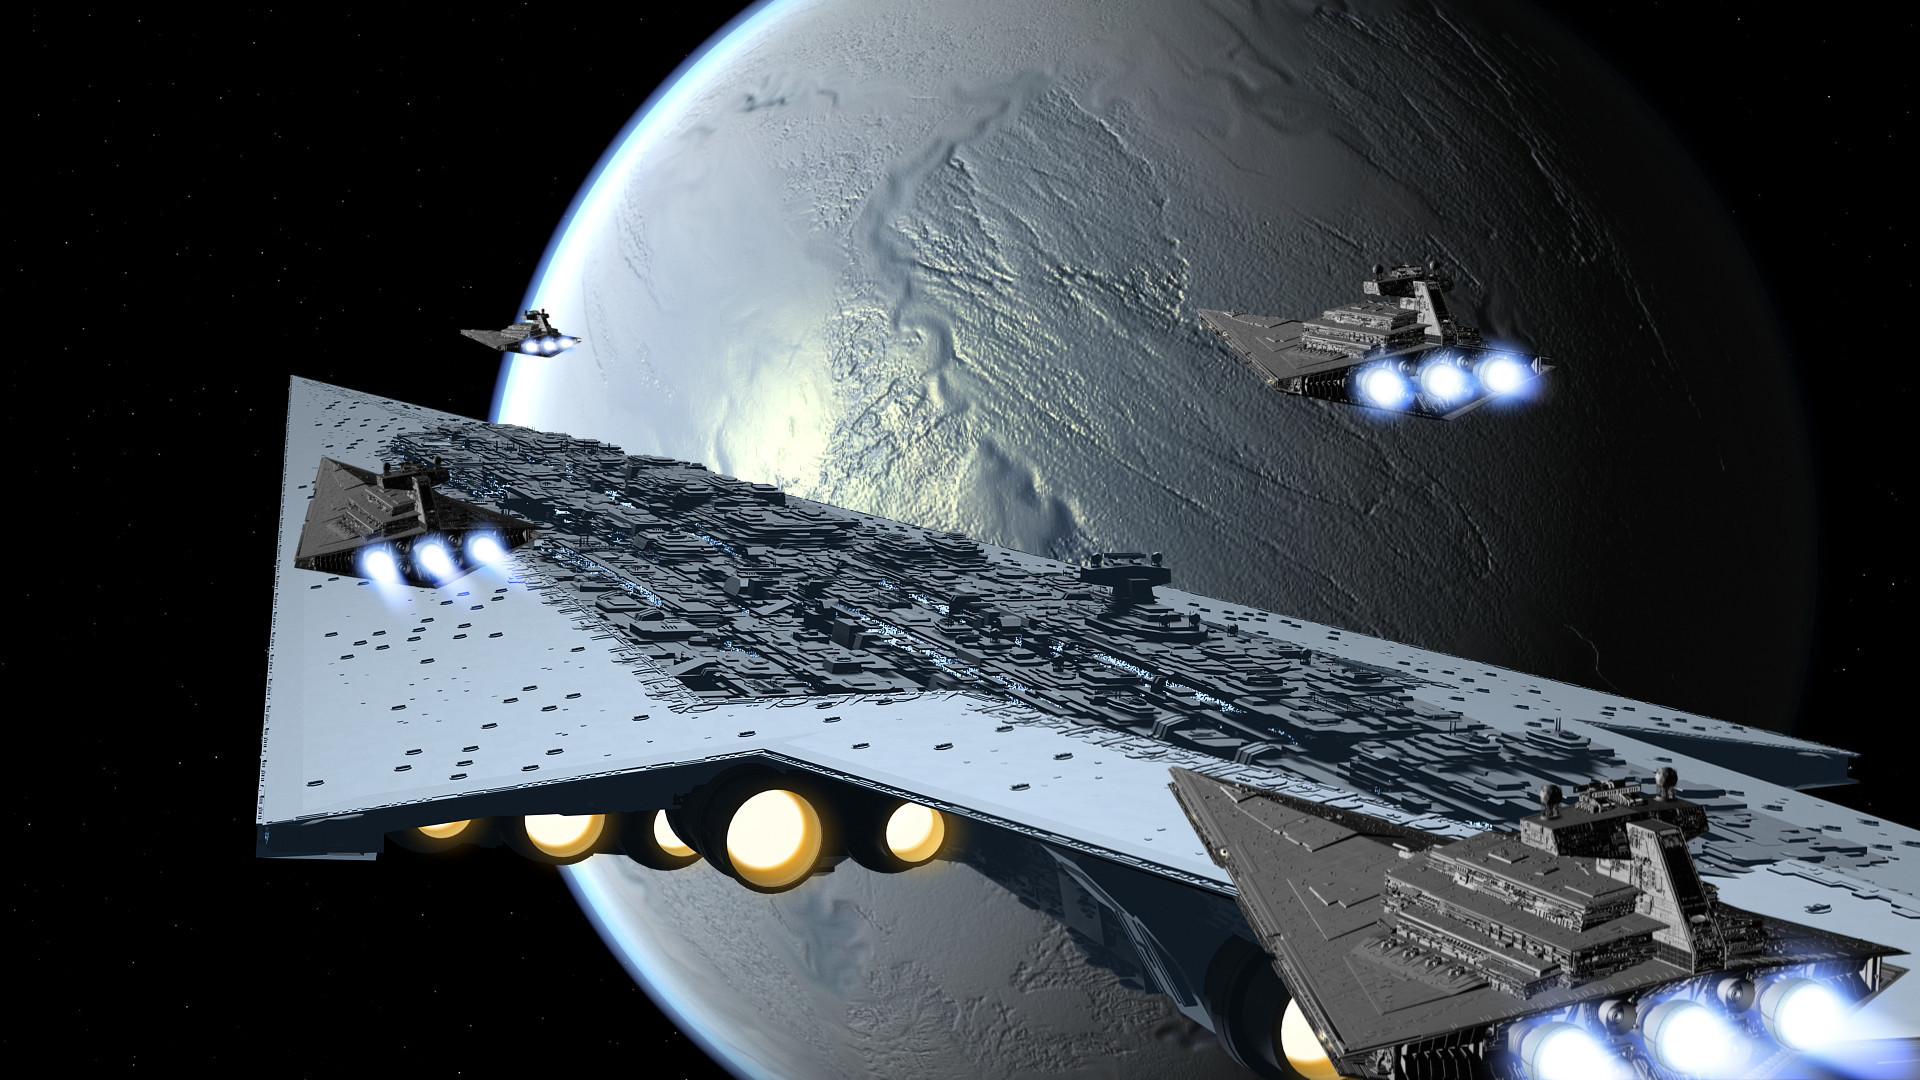 1920x1080  Imperial Star Destroyer Wallpaper HD 30. 22 Â· Download Â· Res:  2560x1600 ...